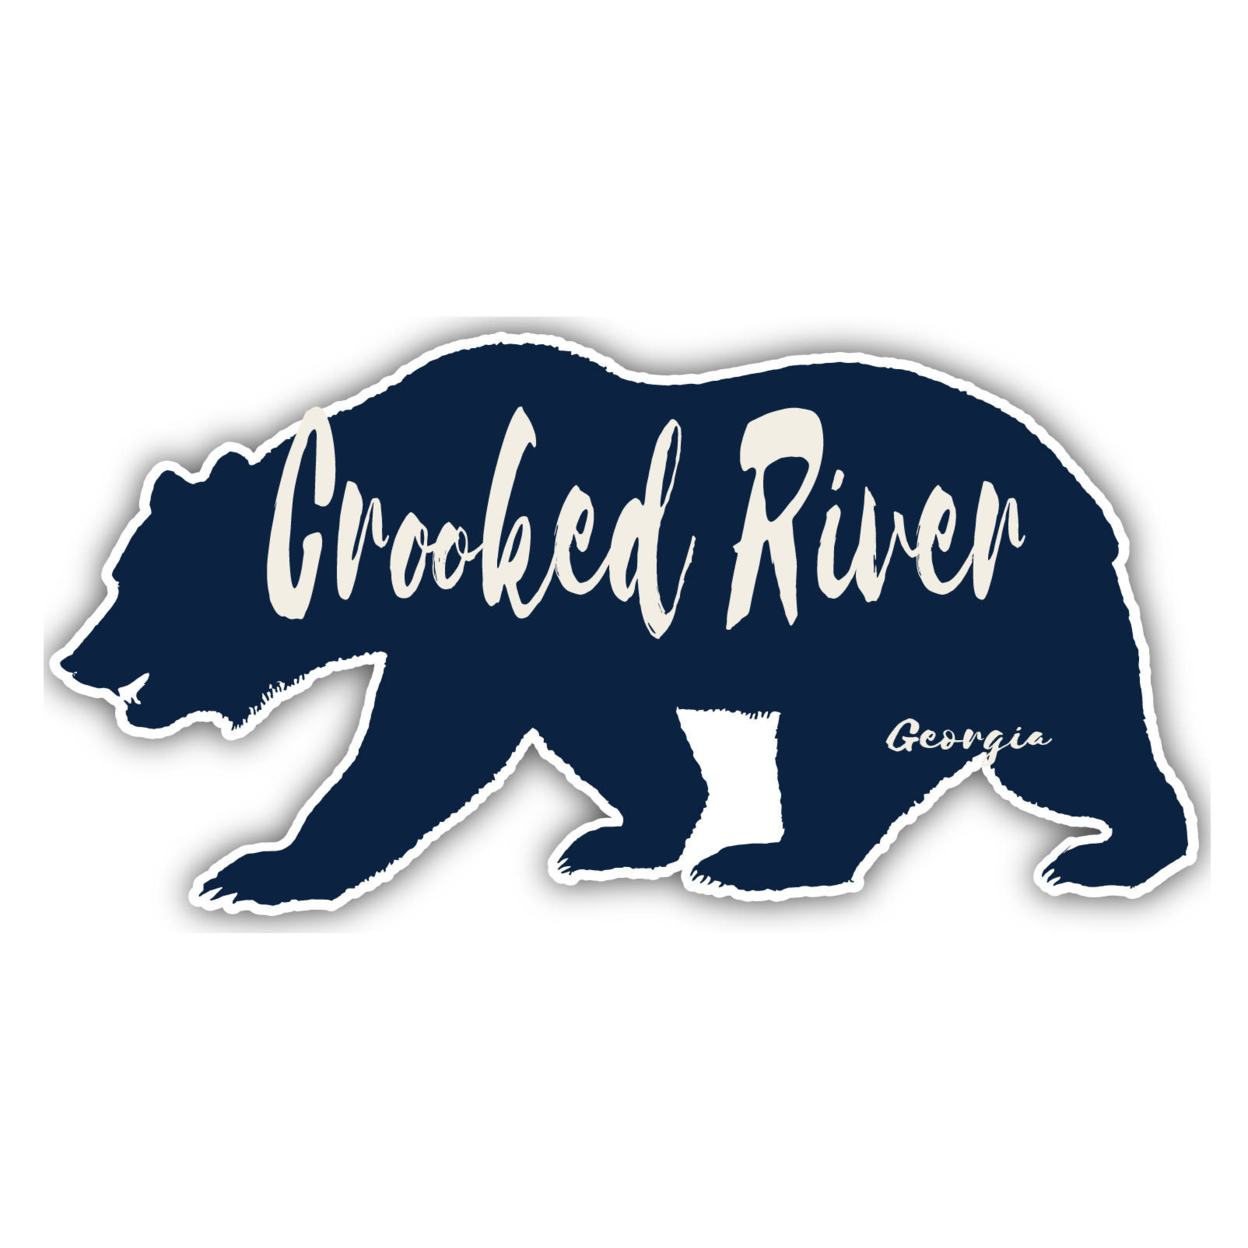 Crooked River Georgia Souvenir Decorative Stickers (Choose Theme And Size) - 4-Pack, 10-Inch, Bear